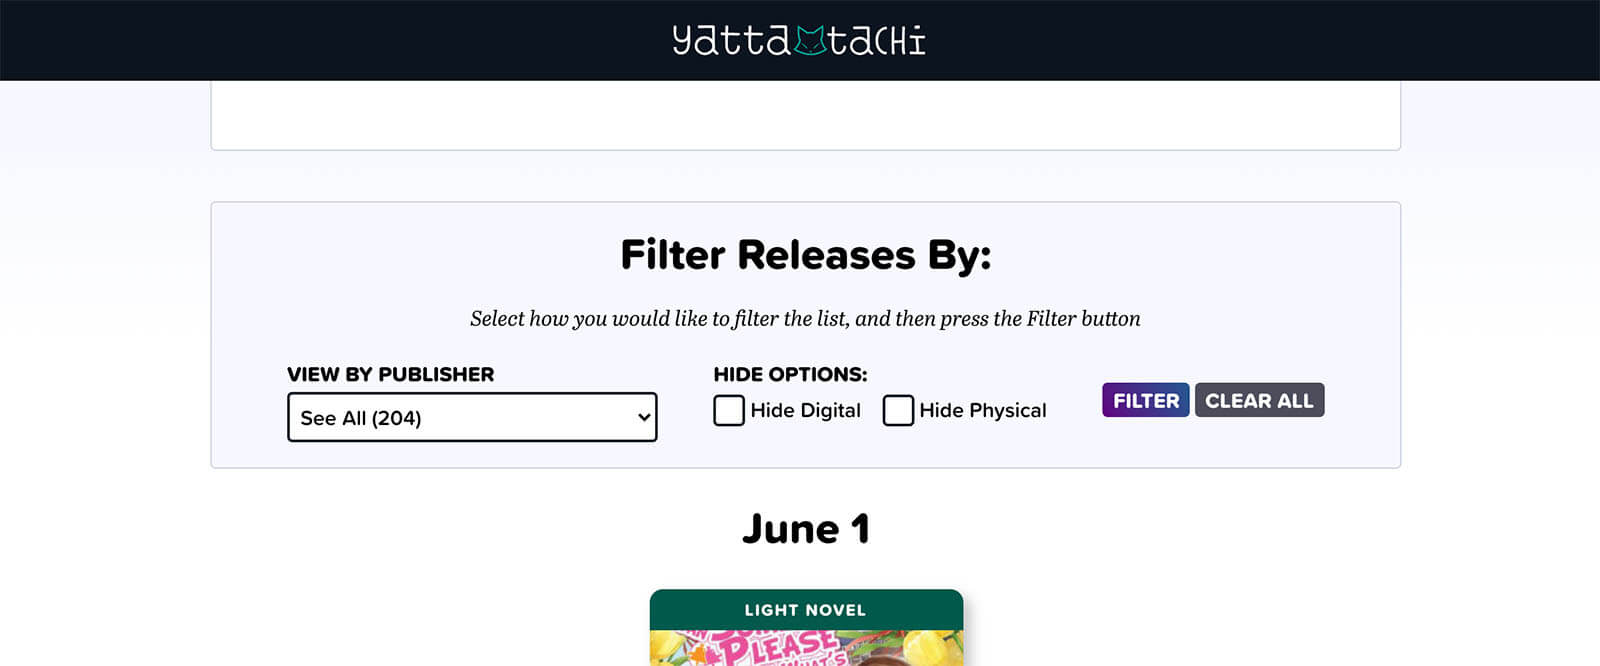 Box on the release article with the title, "Filter Releases By:" and the option to filter by Publisher, and hide options for digital and physical releases.